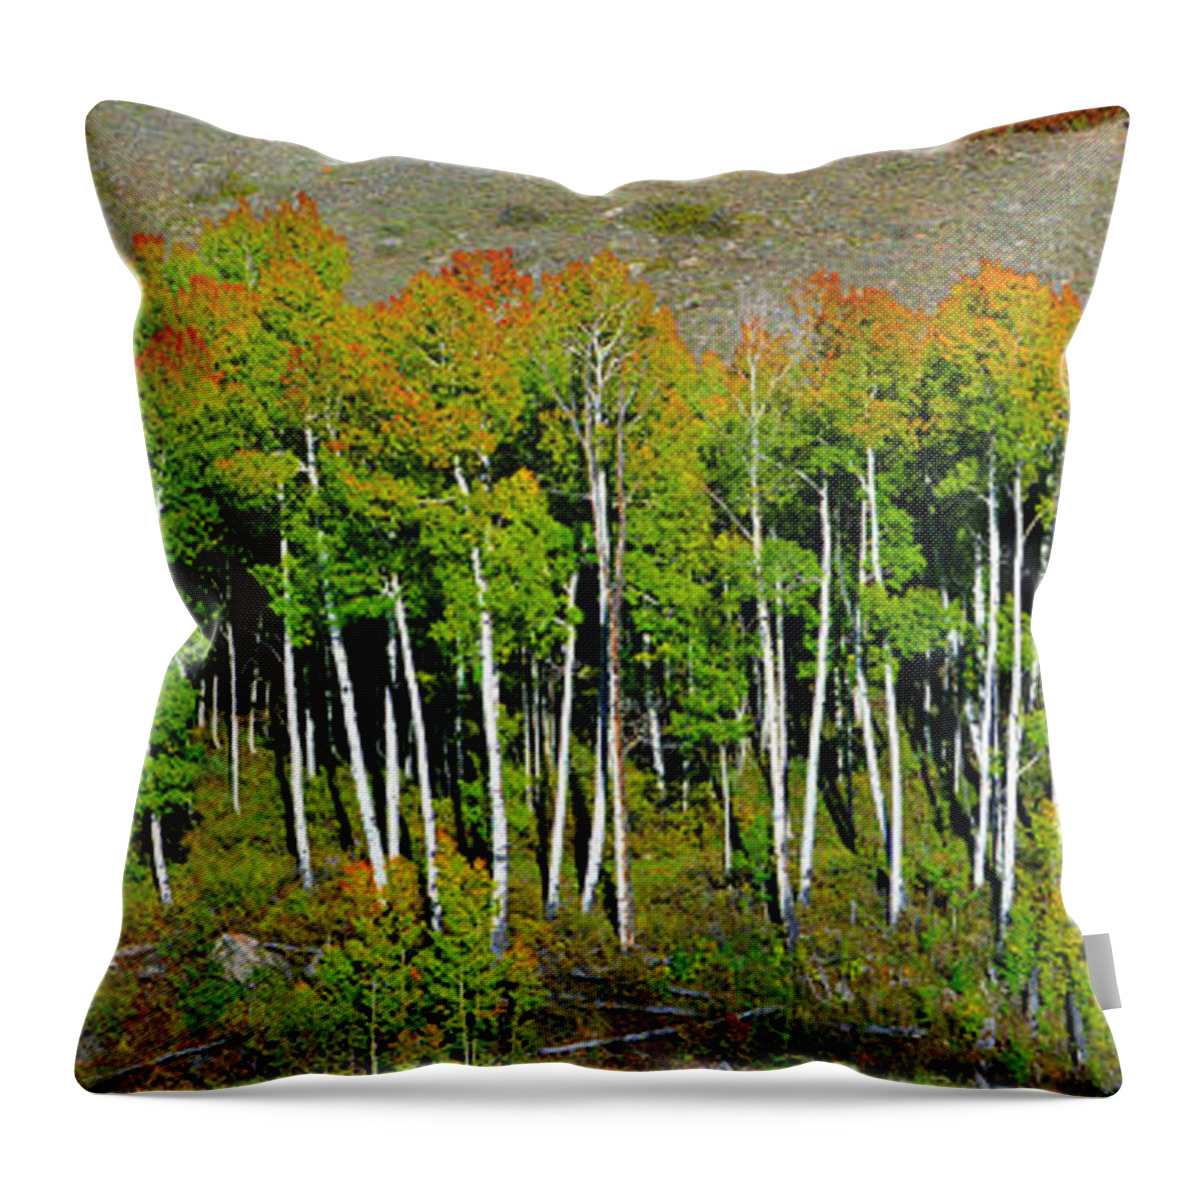 Spreading Out Throw Pillow featuring the photograph Spreading out #2 by David Lee Thompson